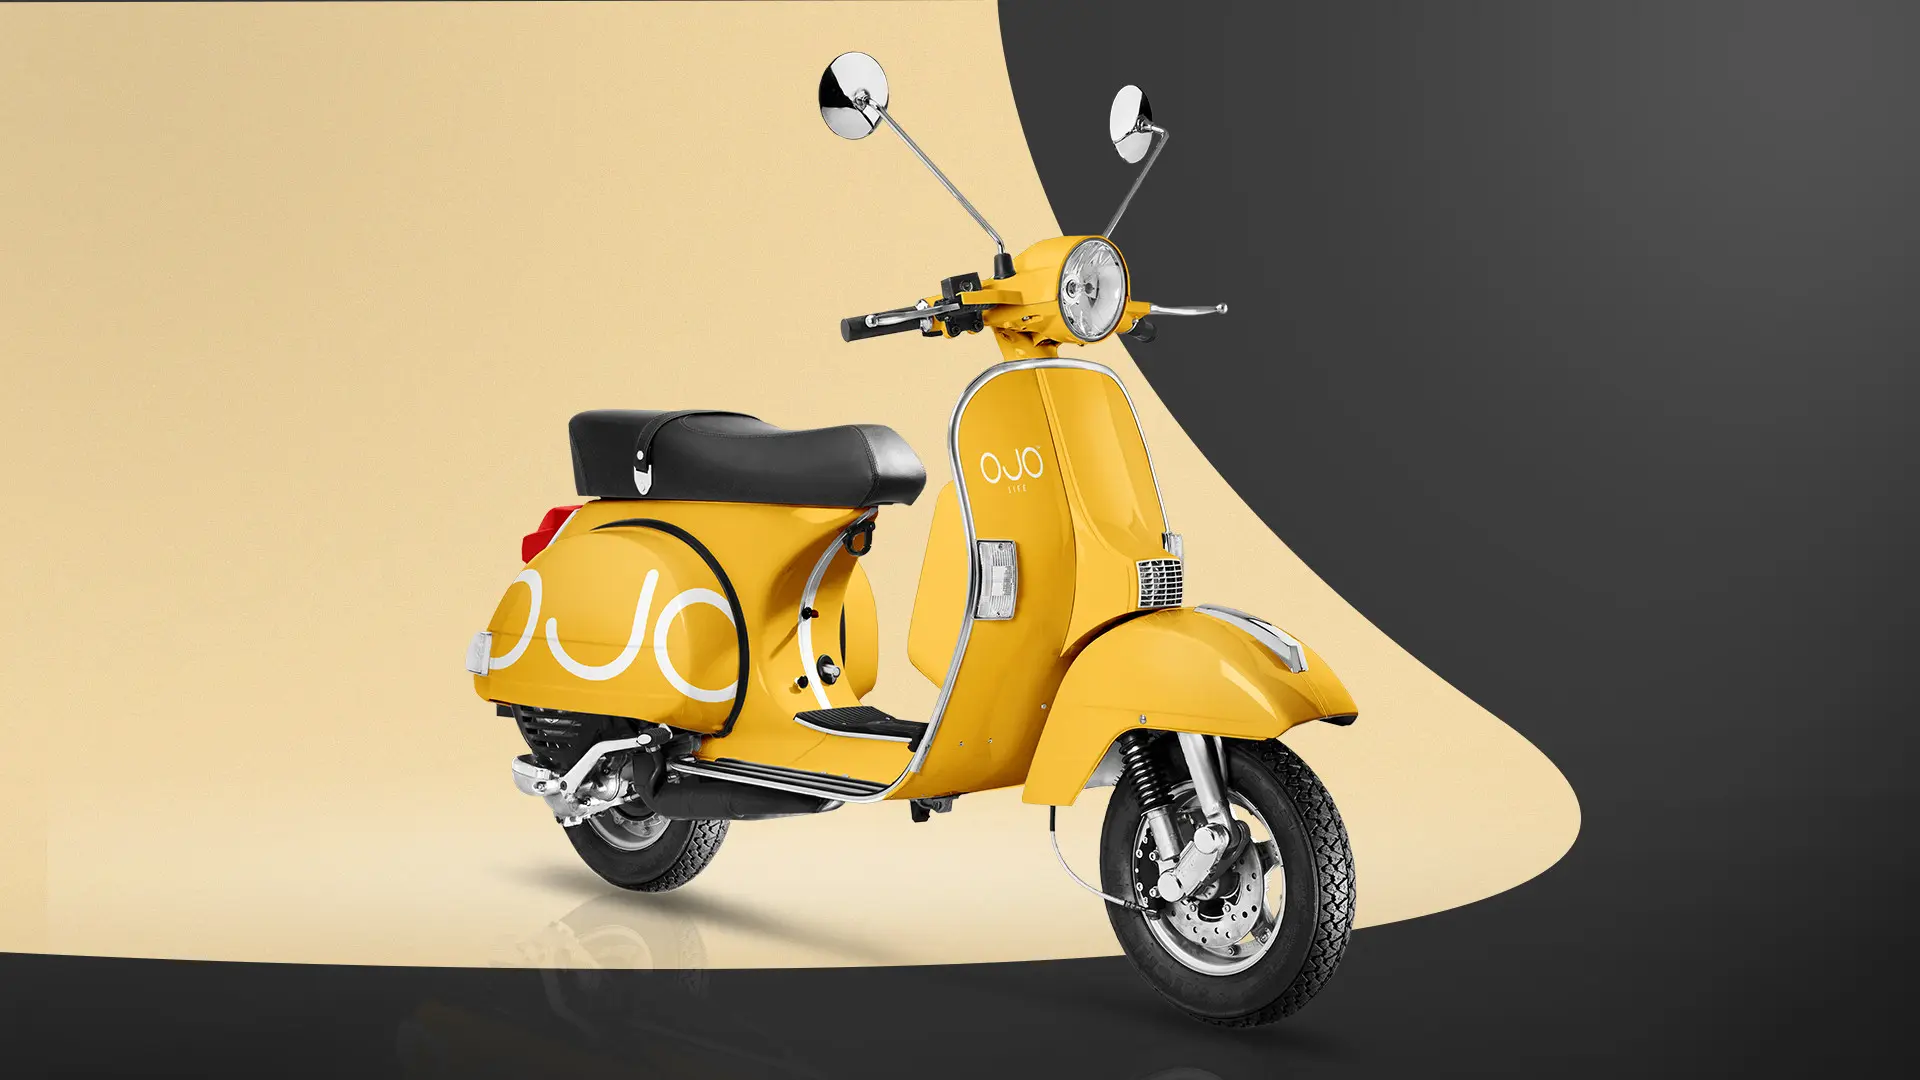 A yellow scooter on a yellow background.